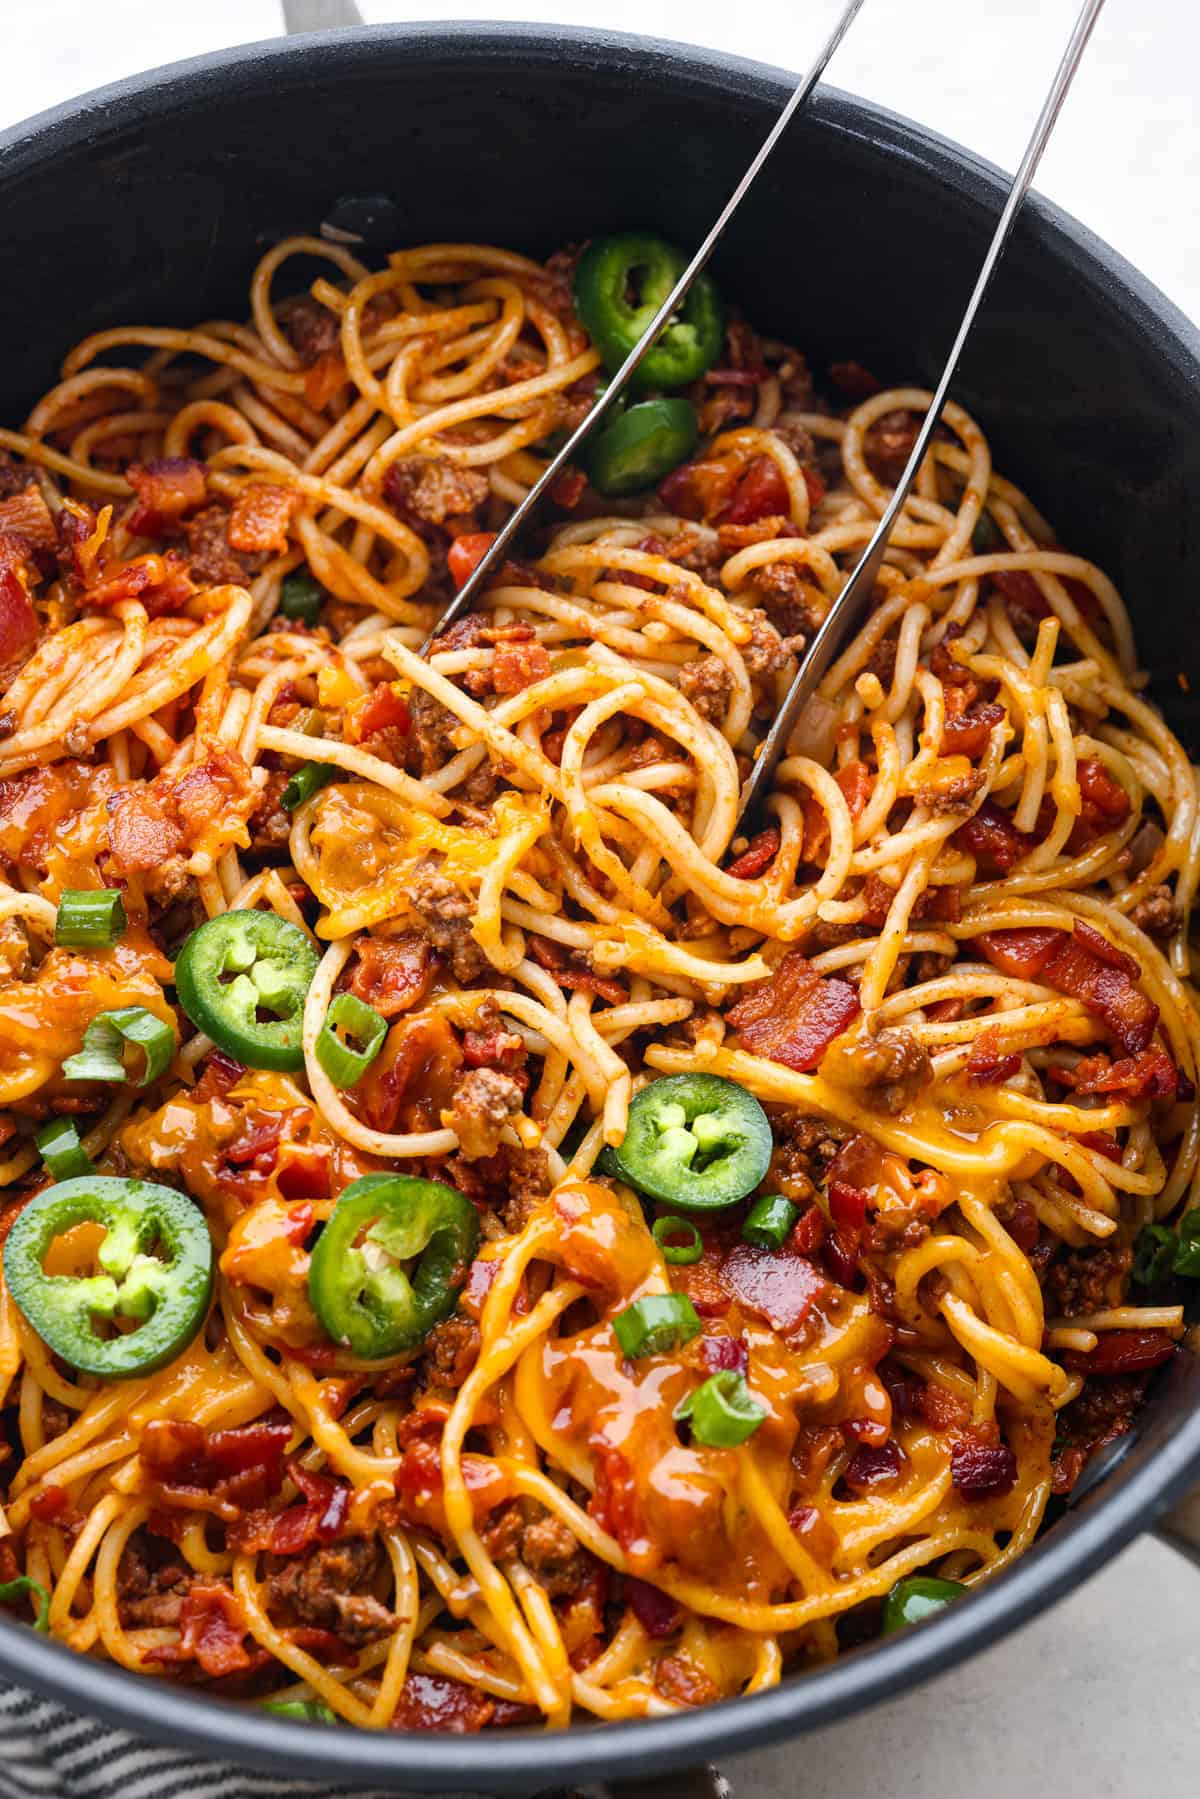 A skillet filled with spaghetti mixed with ground meat, tomato sauce, melted cheese, and topped with slices of fresh green jalapeño peppers is perfect for busy families. Two forks are inserted into the pasta